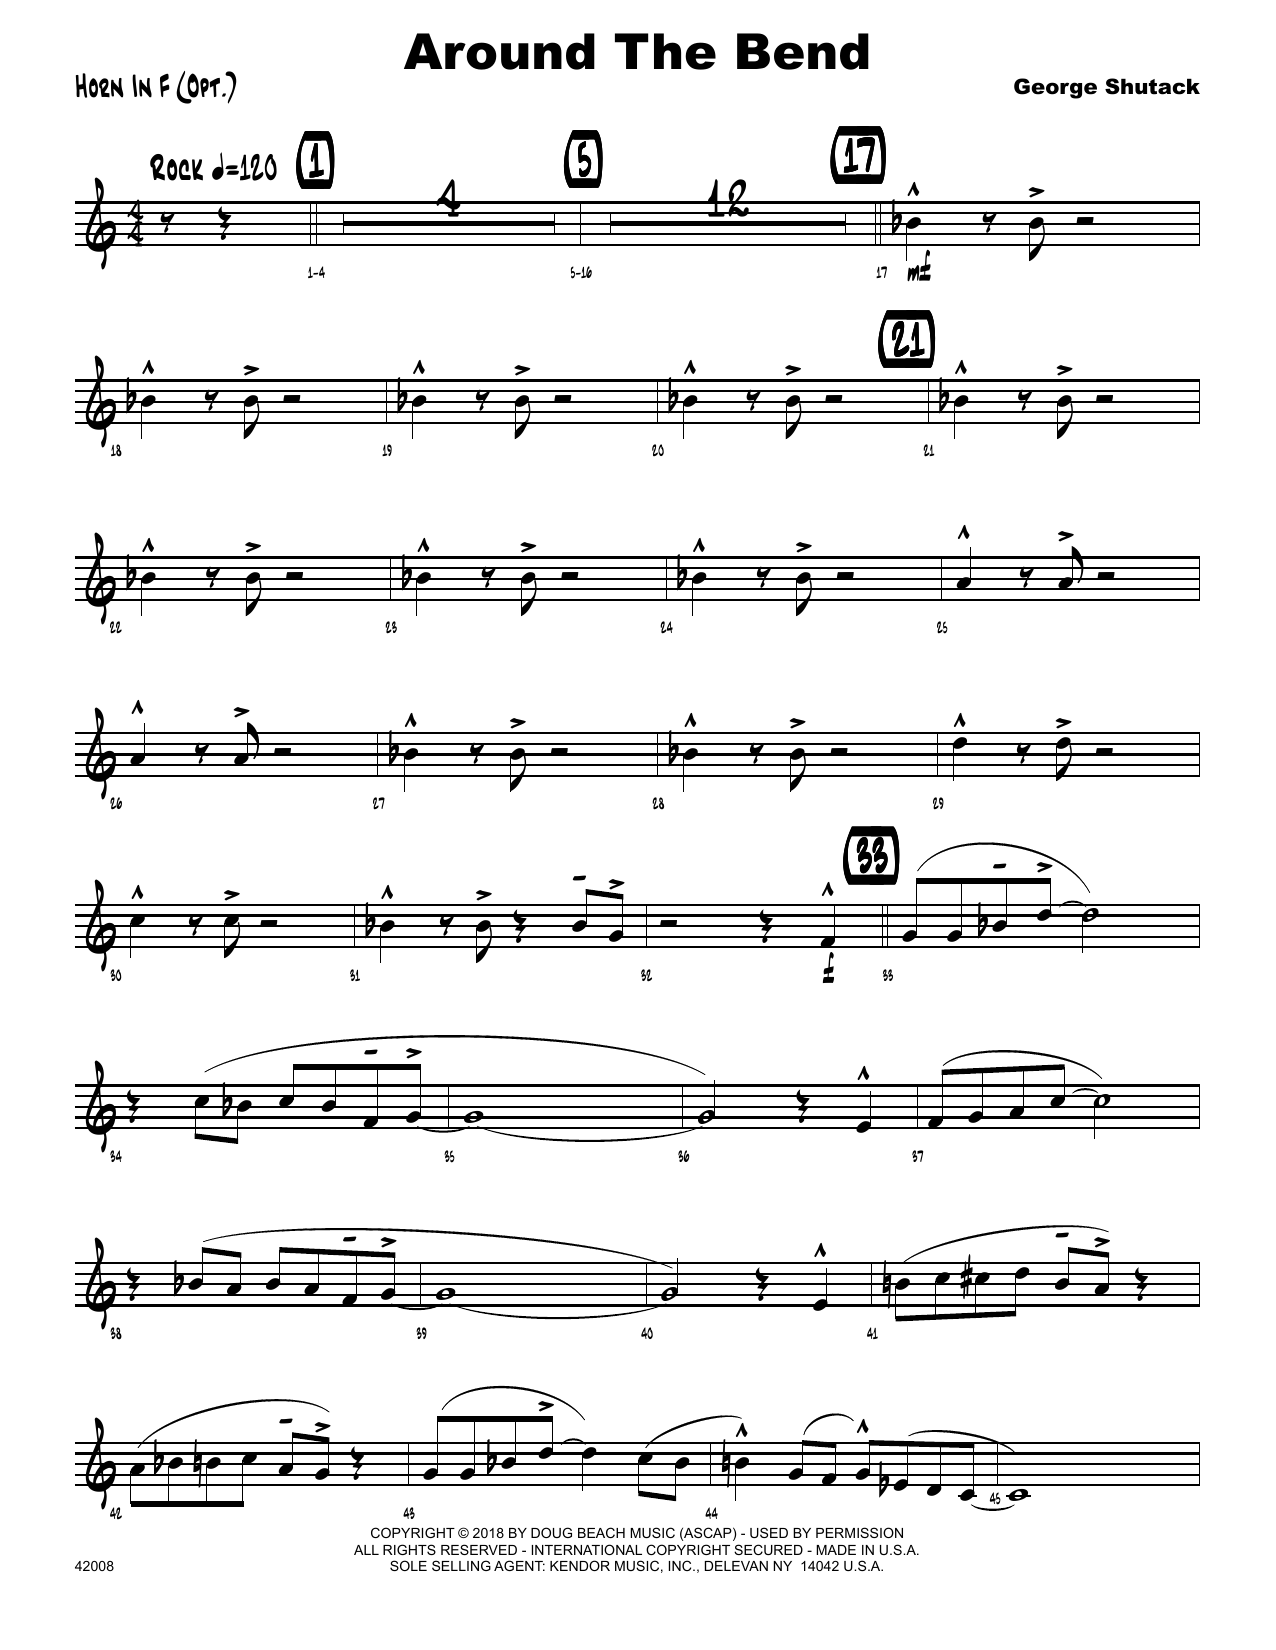 Download George Shutack Around The Bend - Horn in F Sheet Music